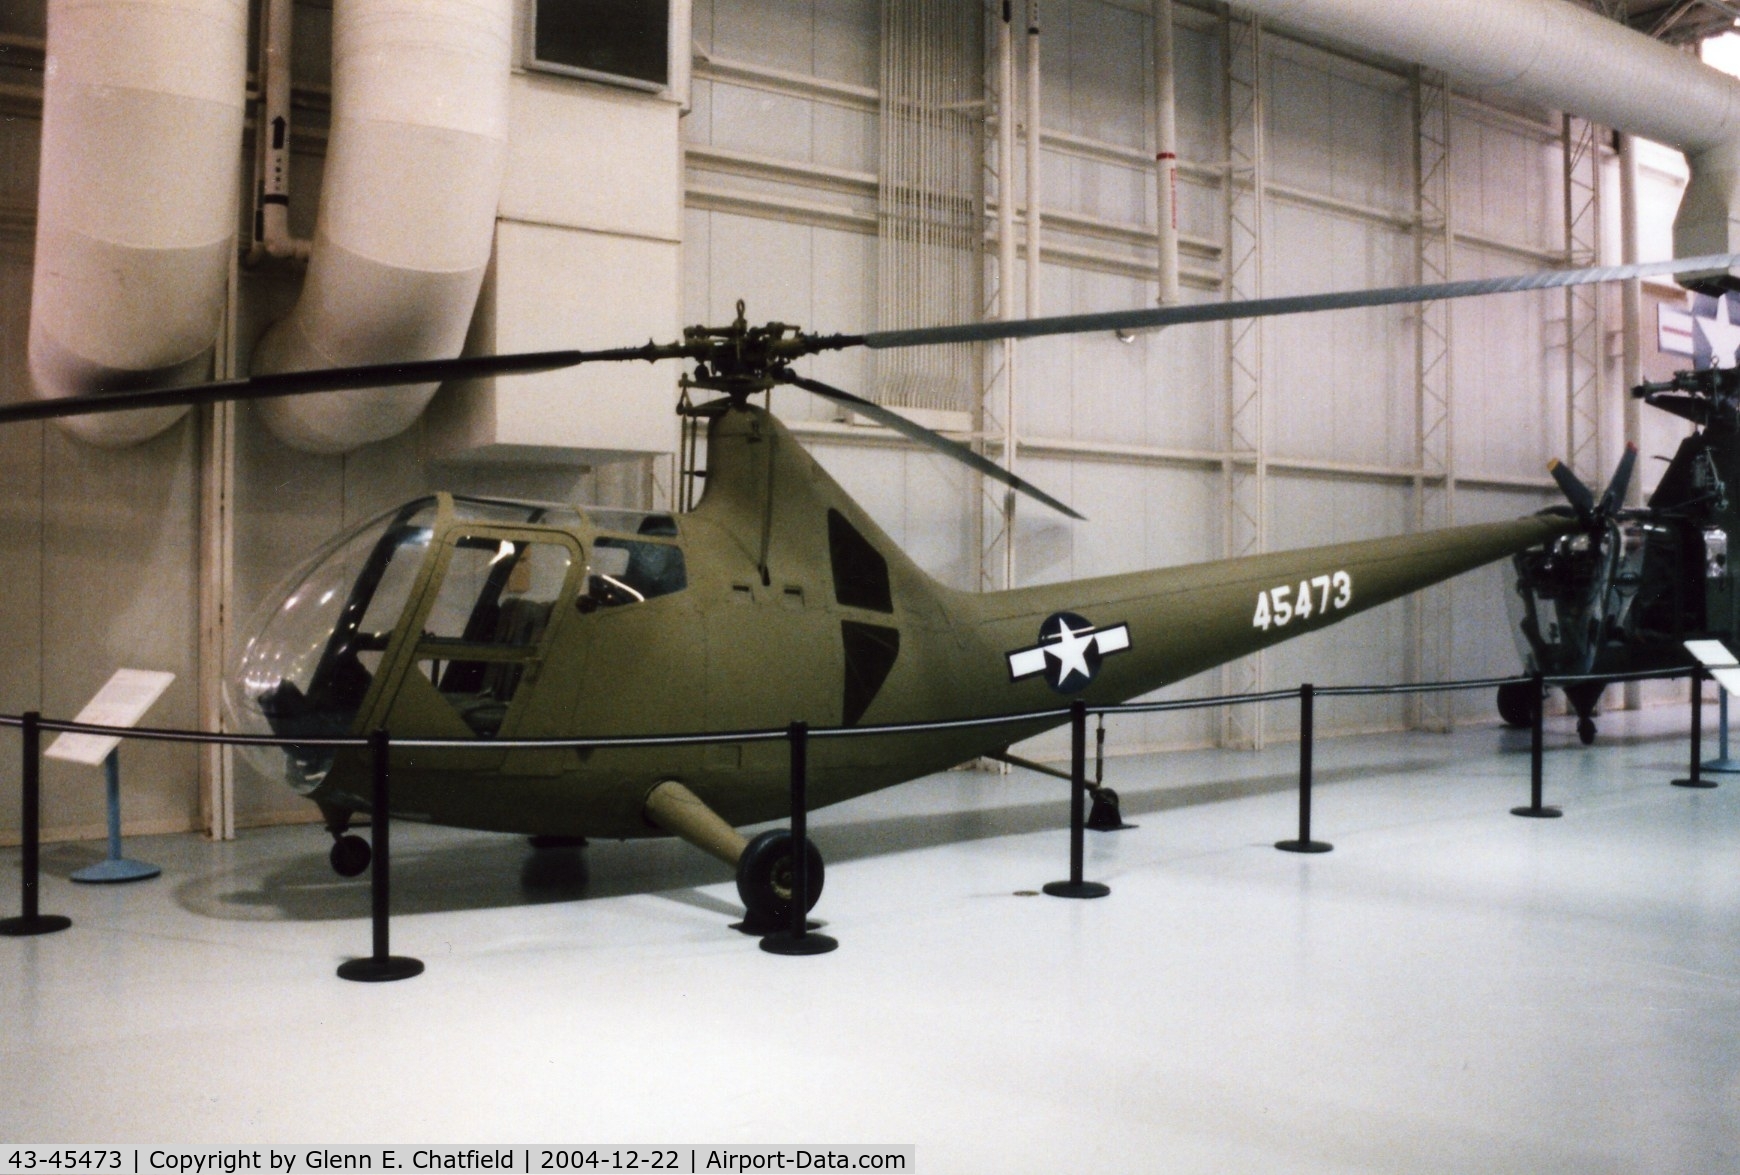 43-45473, 1944 Sikorsky R-6A Hoverfly C/N Not found 43-45473, H-6A at the Army Aviation Museum.  This is a version of the Sikorsky-built model.